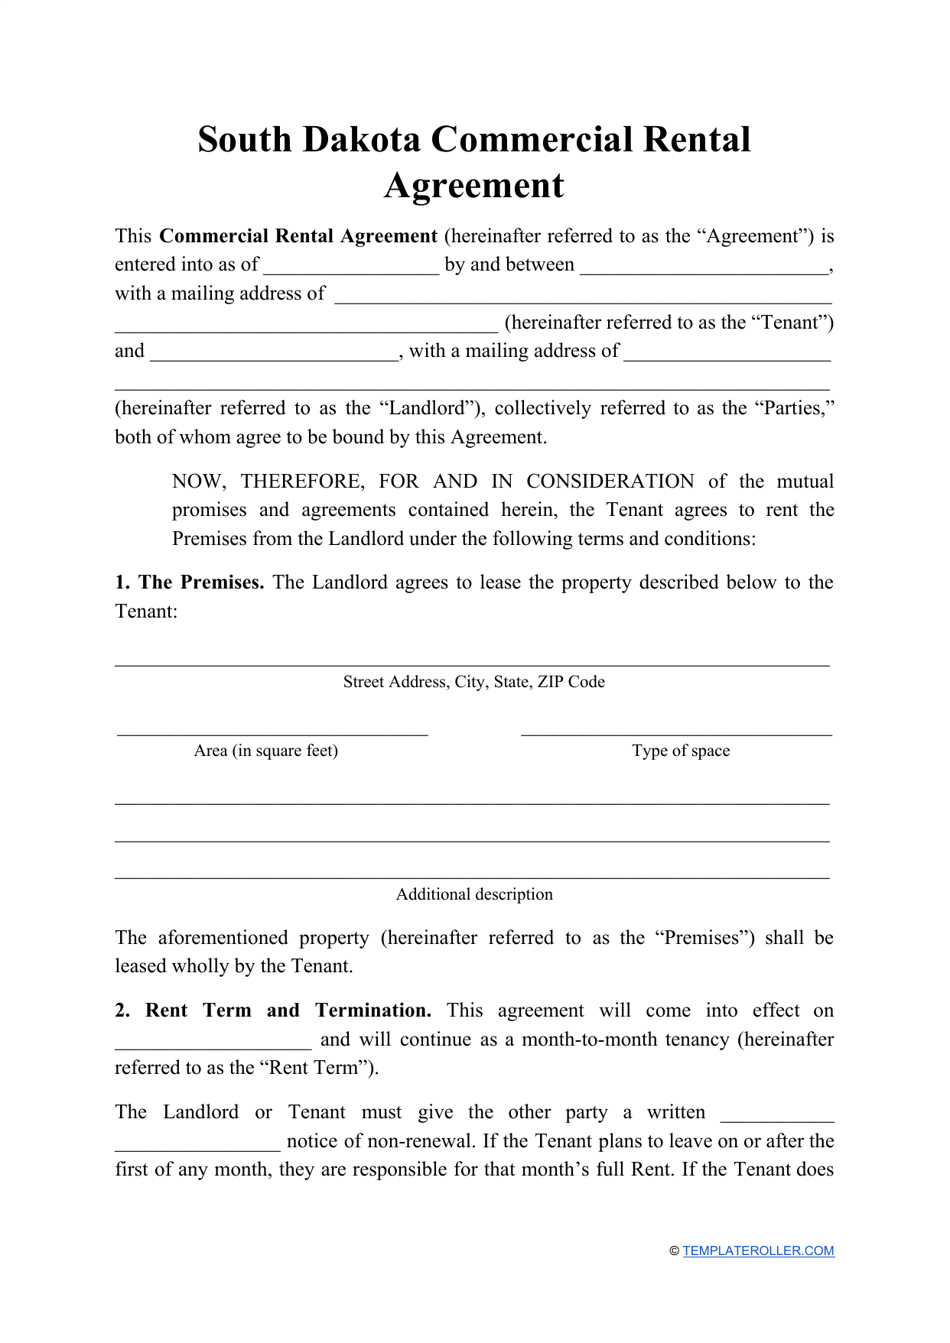 Commercial Rental Agreement Template - South Dakota, Page 1